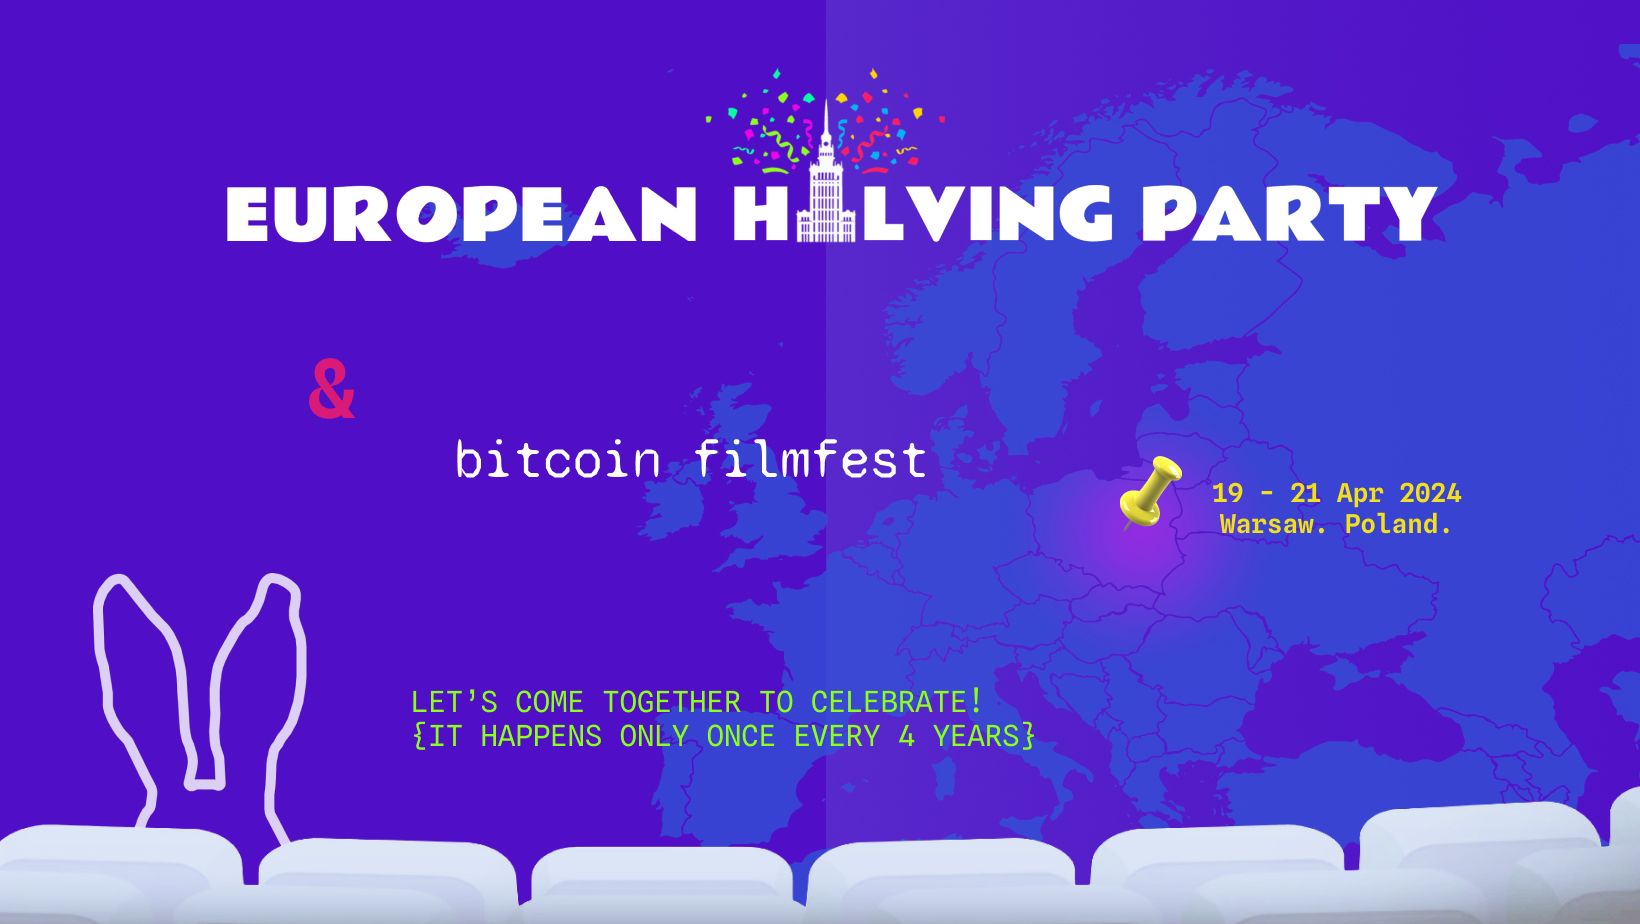 The halving is coming and so should you!